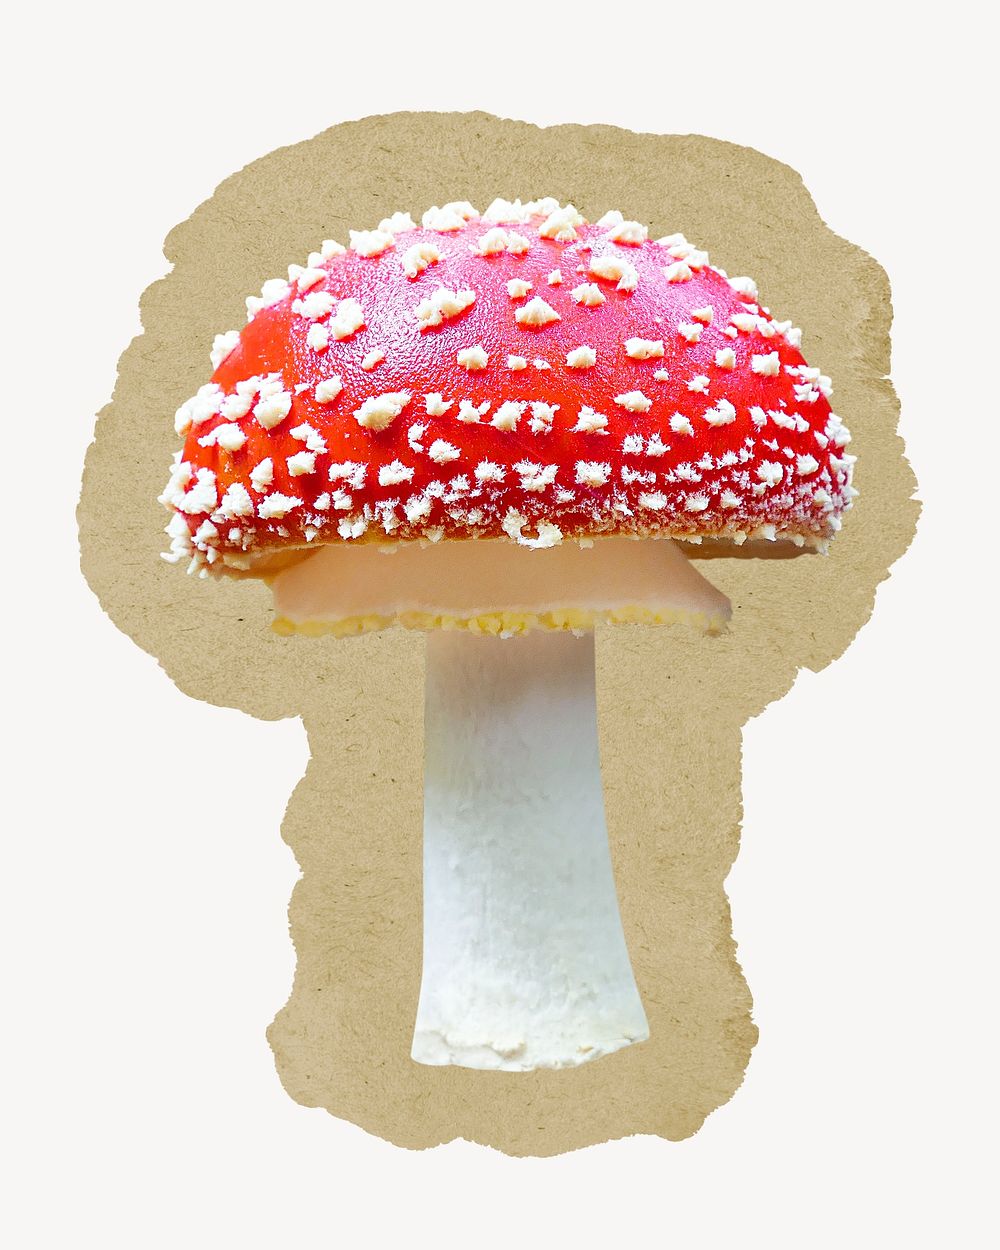 Poisonous mushroom, ripped paper collage element